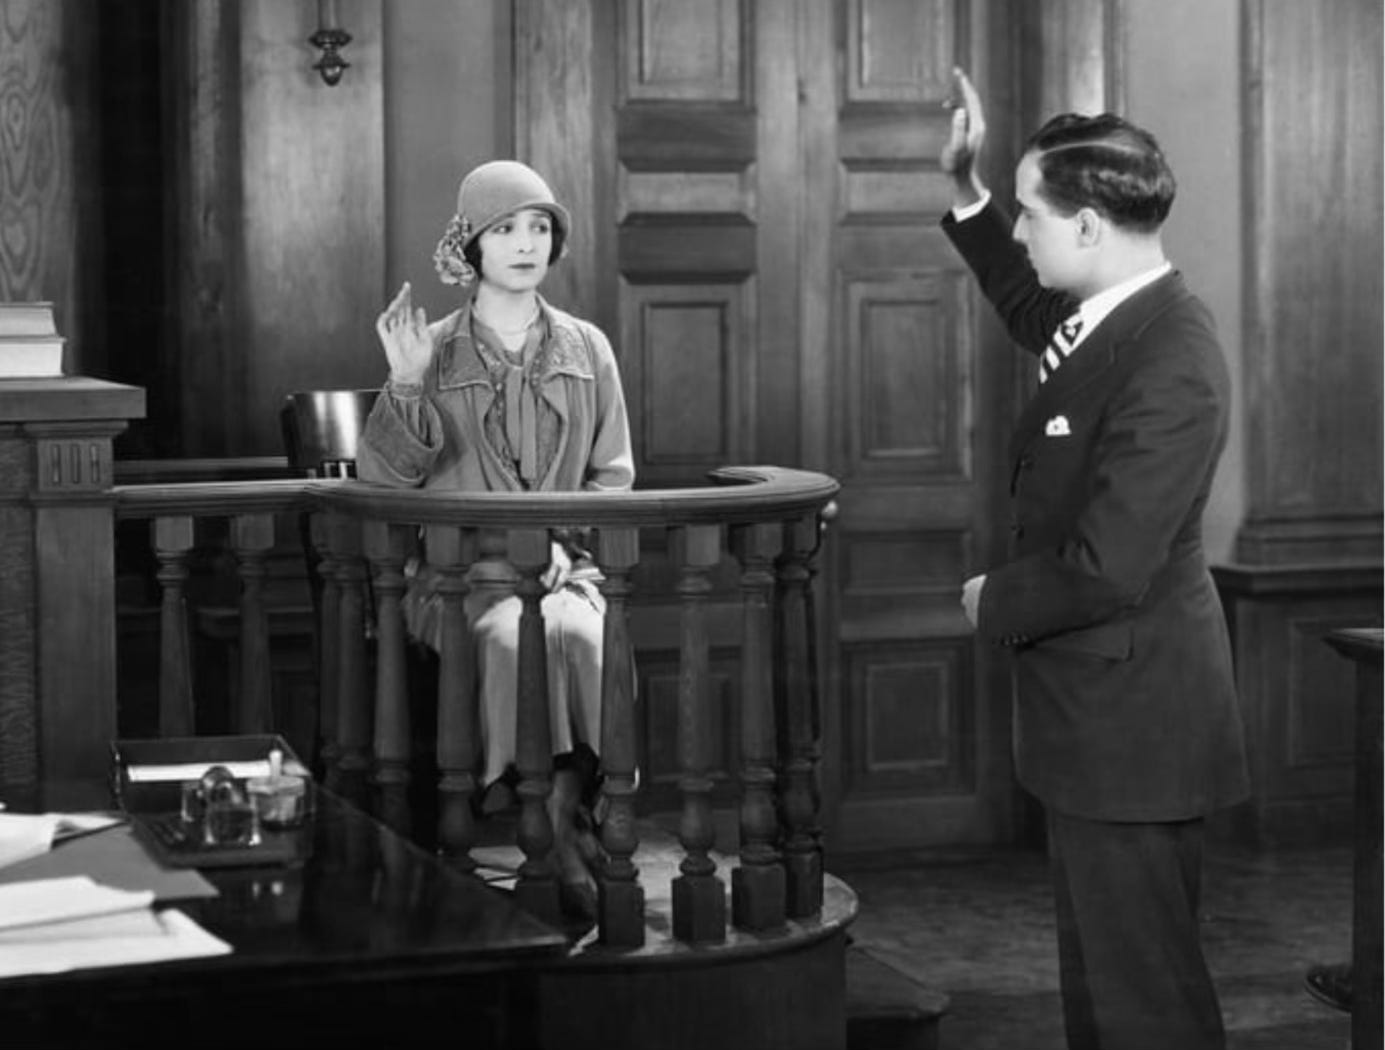 Black & white photo of woman being sworn in as witness in court proceeding.